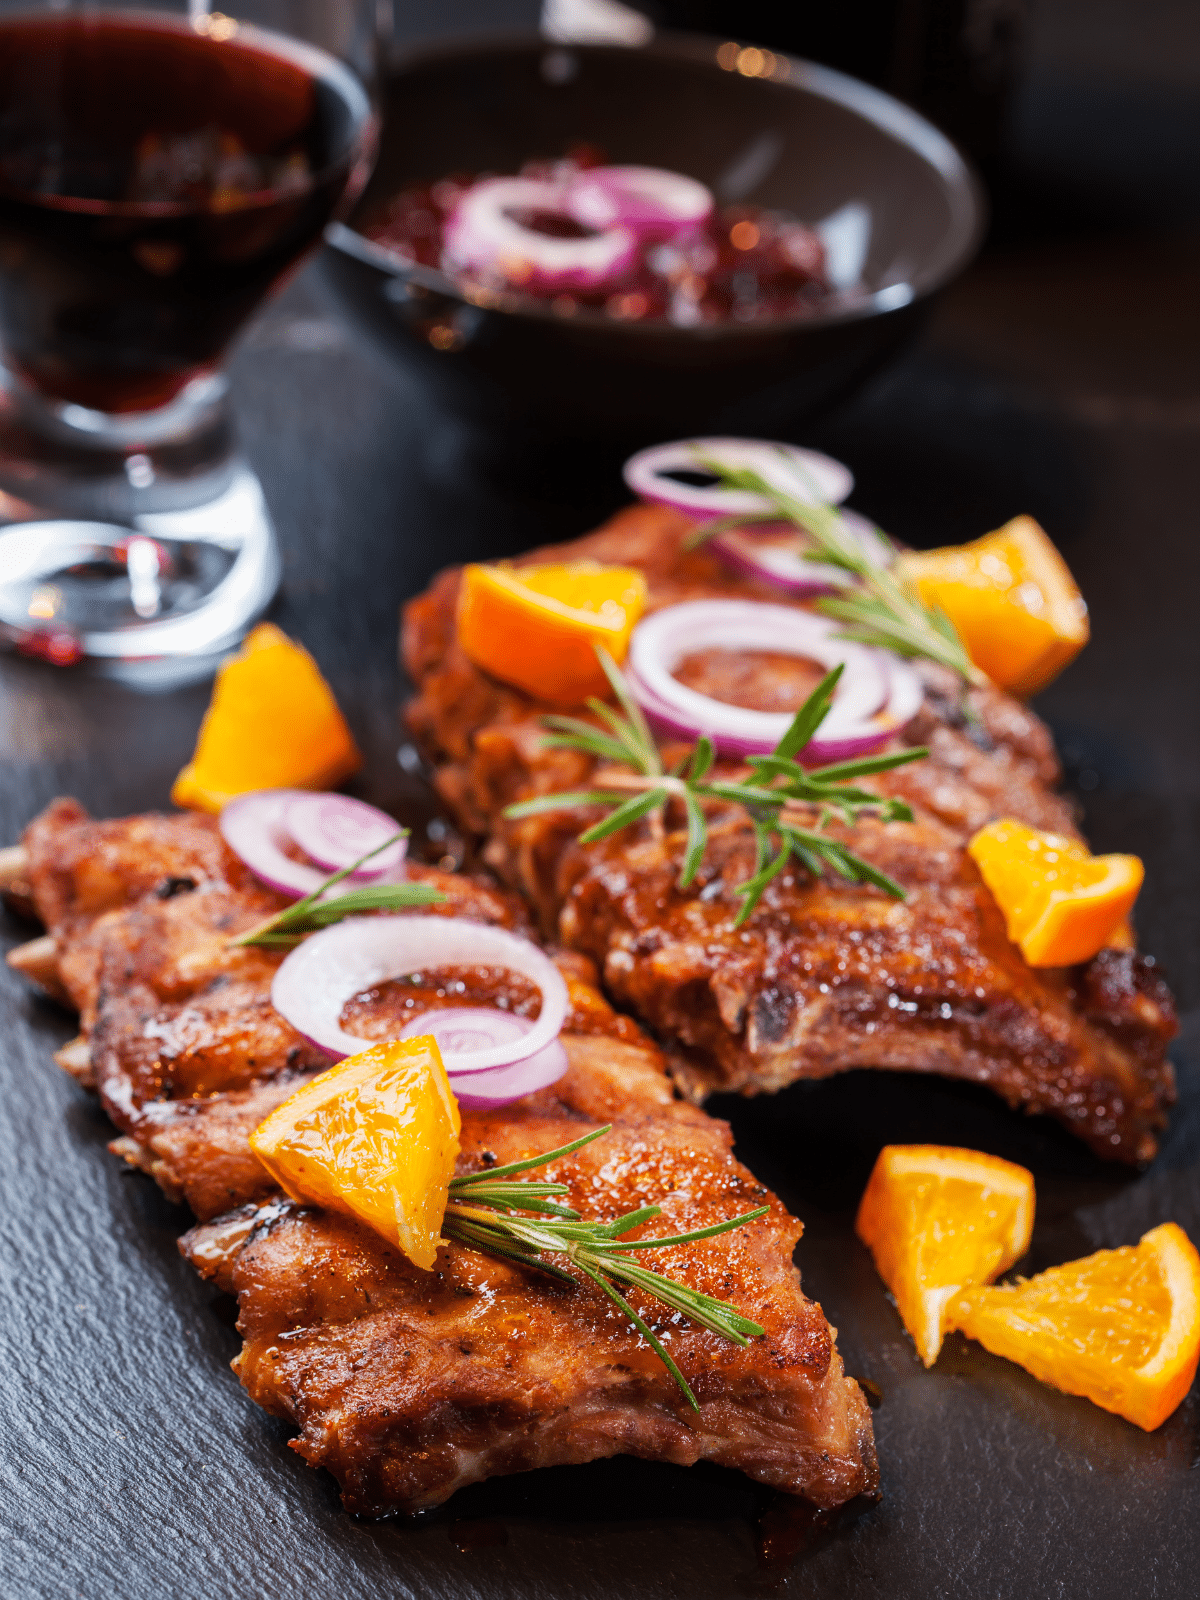 BBQ spare ribs marinated with orange juice, garnished with onions, rosemary, and sliced orange.